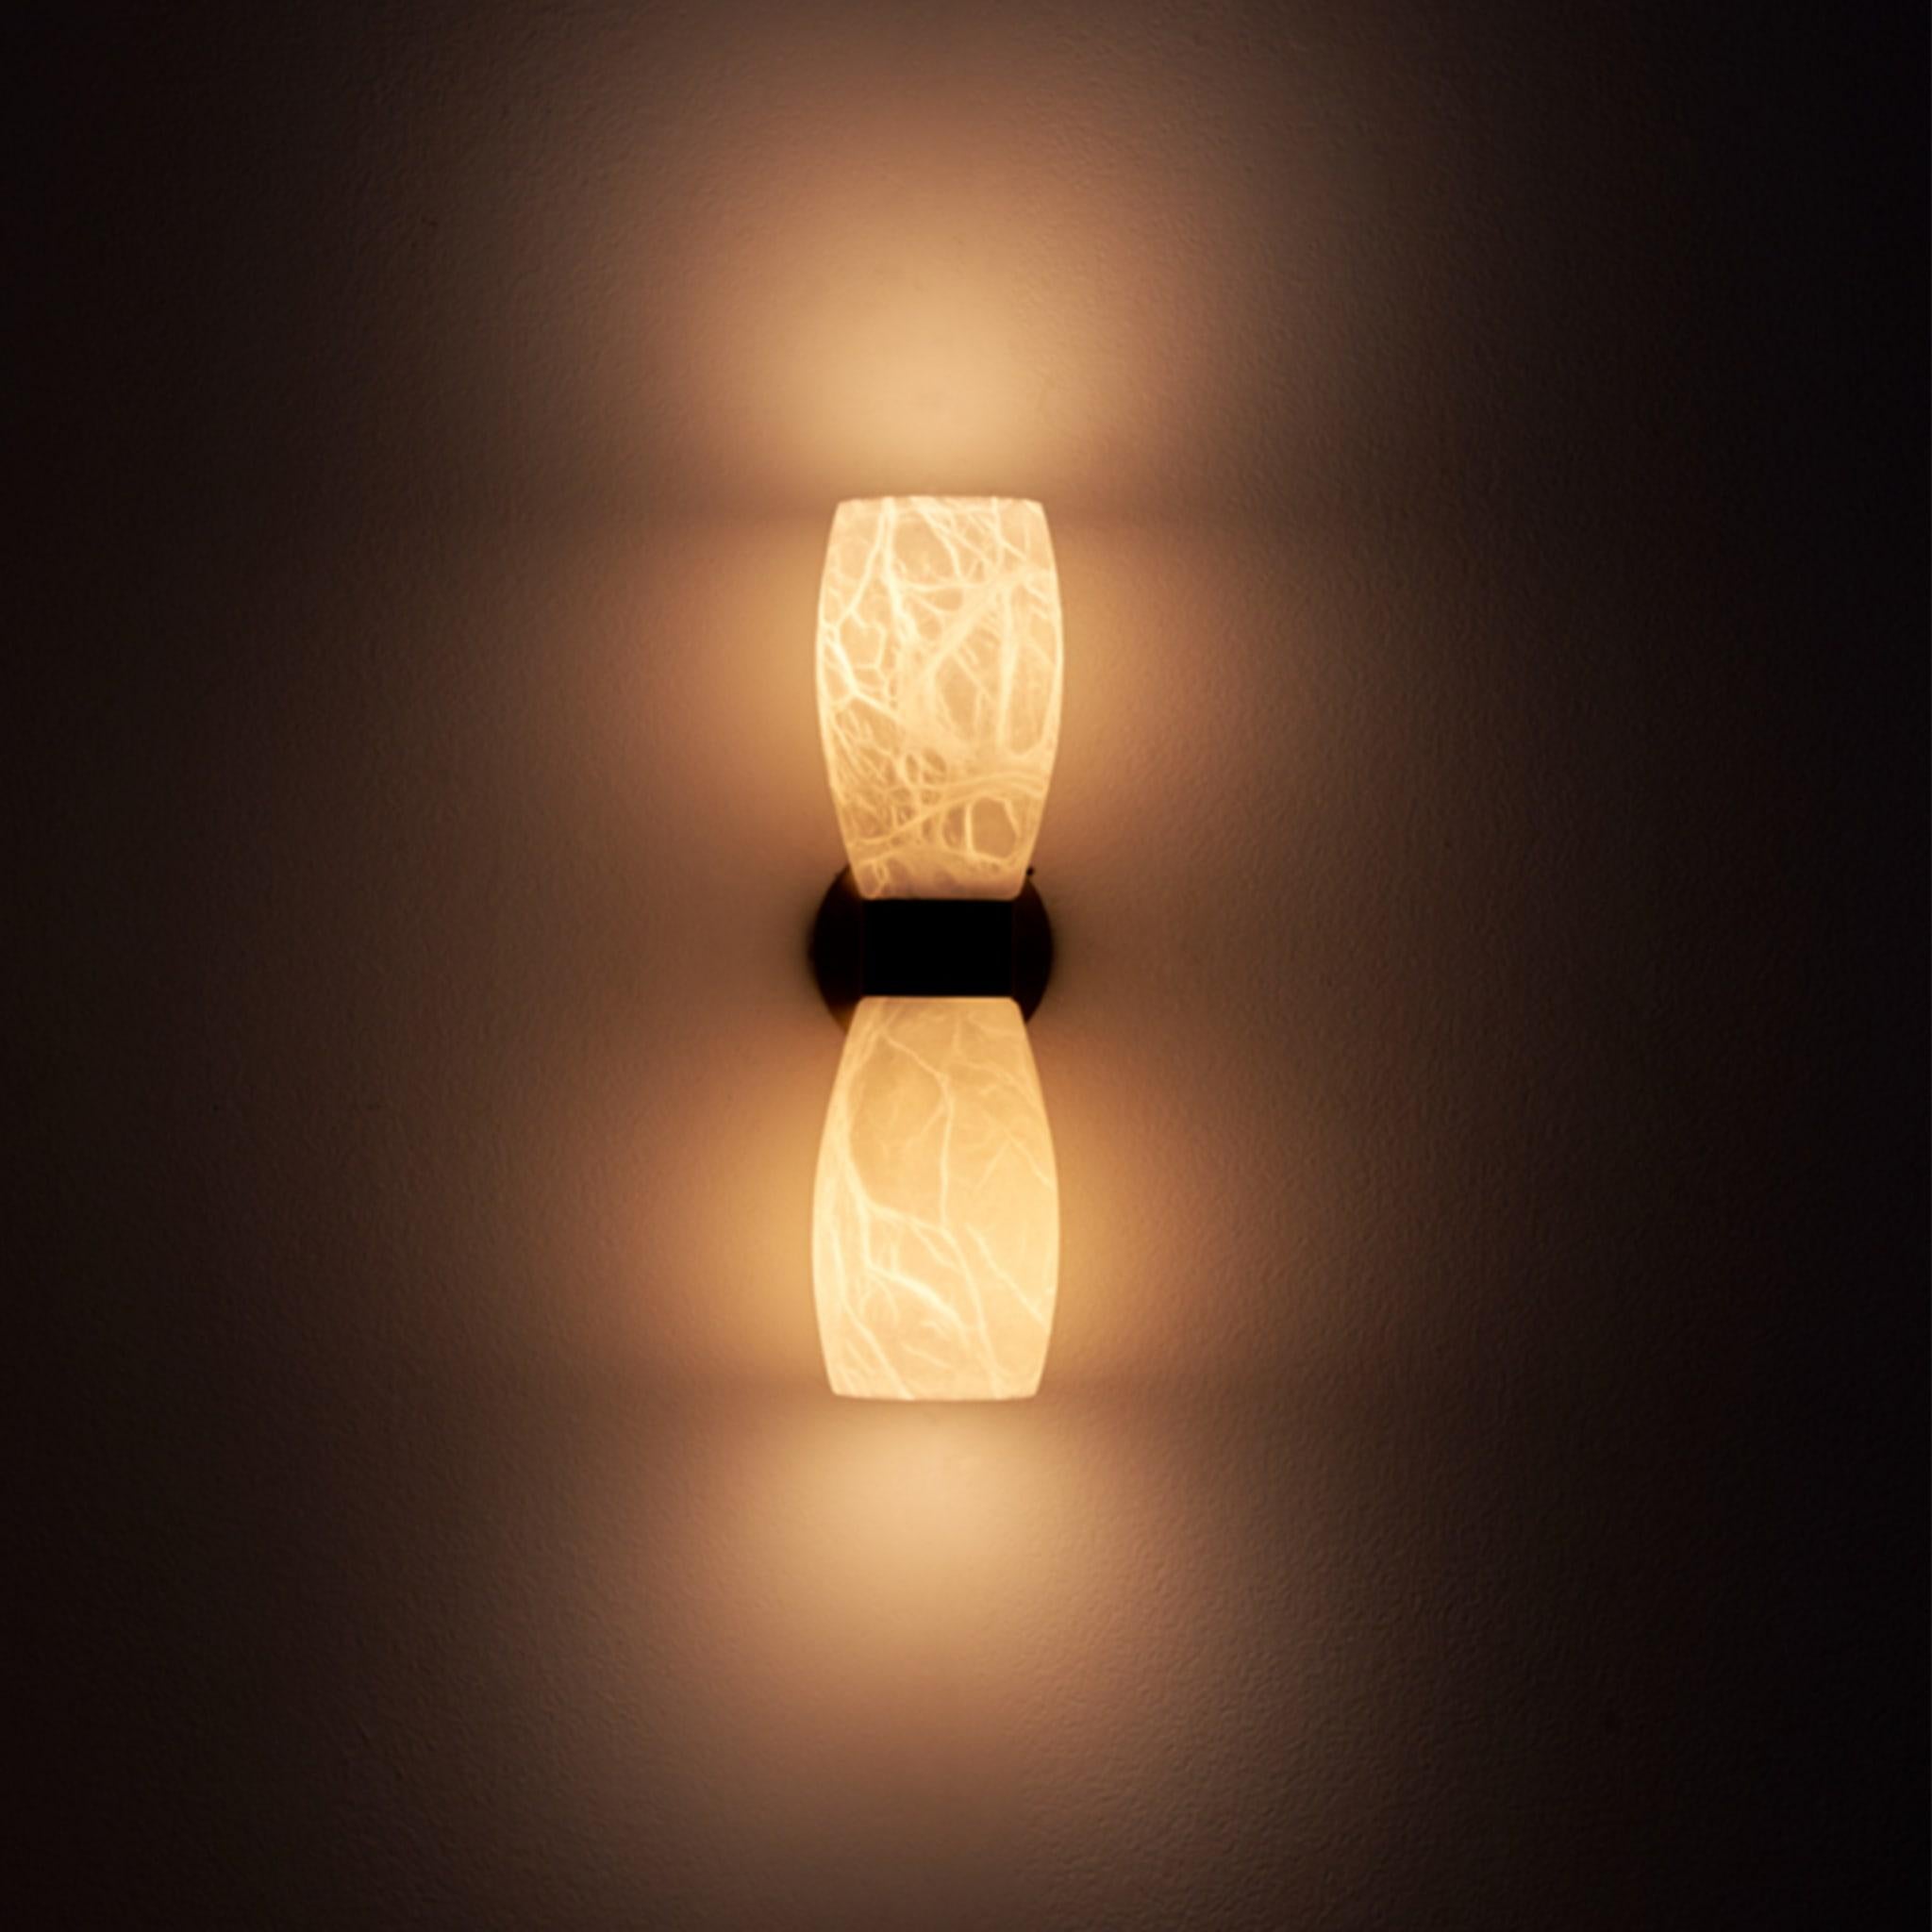 Demetra wall sconce, inspired by the mid-century style, combines the French gold and mat black finishes with alabaster to create a mesmerizing display. The ethereal glow emitted by the illuminated cups seems to hover in the air, casting a gentle,